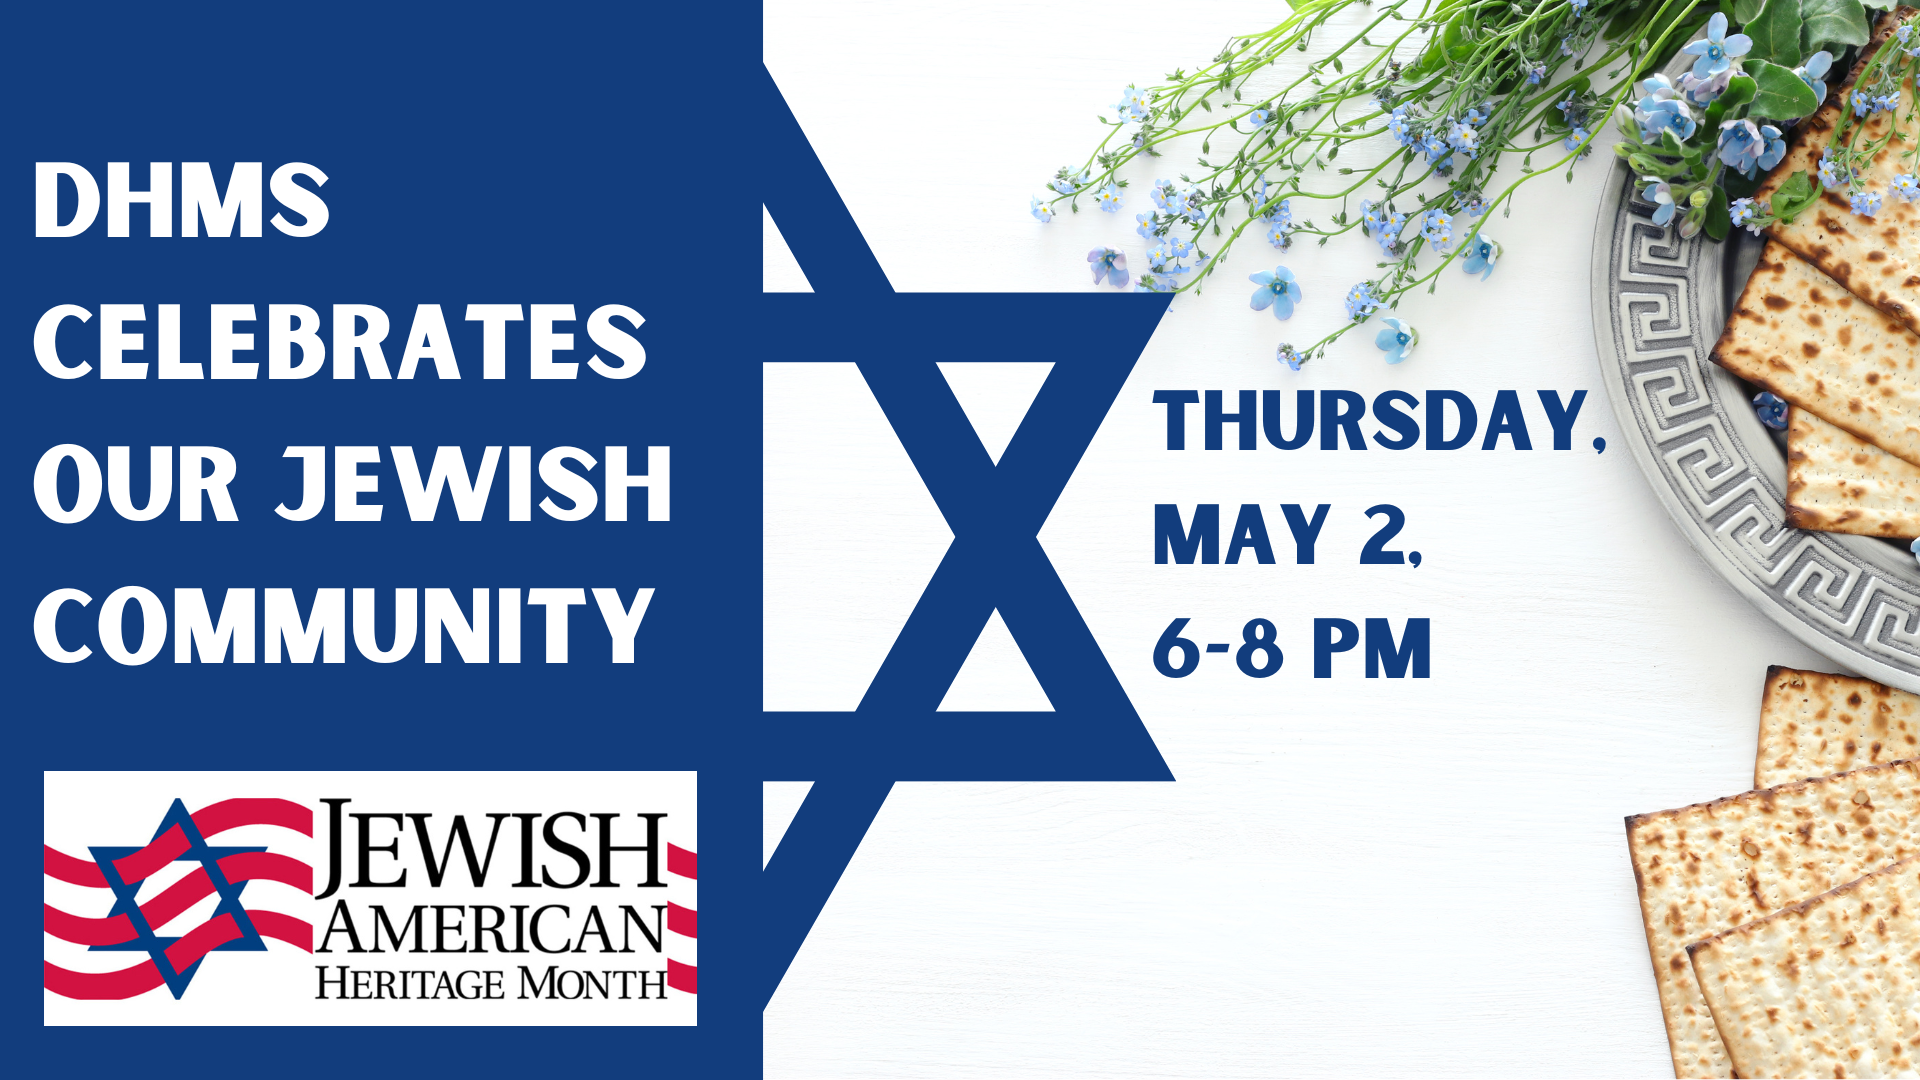 DHMS Celebrates our Jewish community event on May 2, 6-8 pm